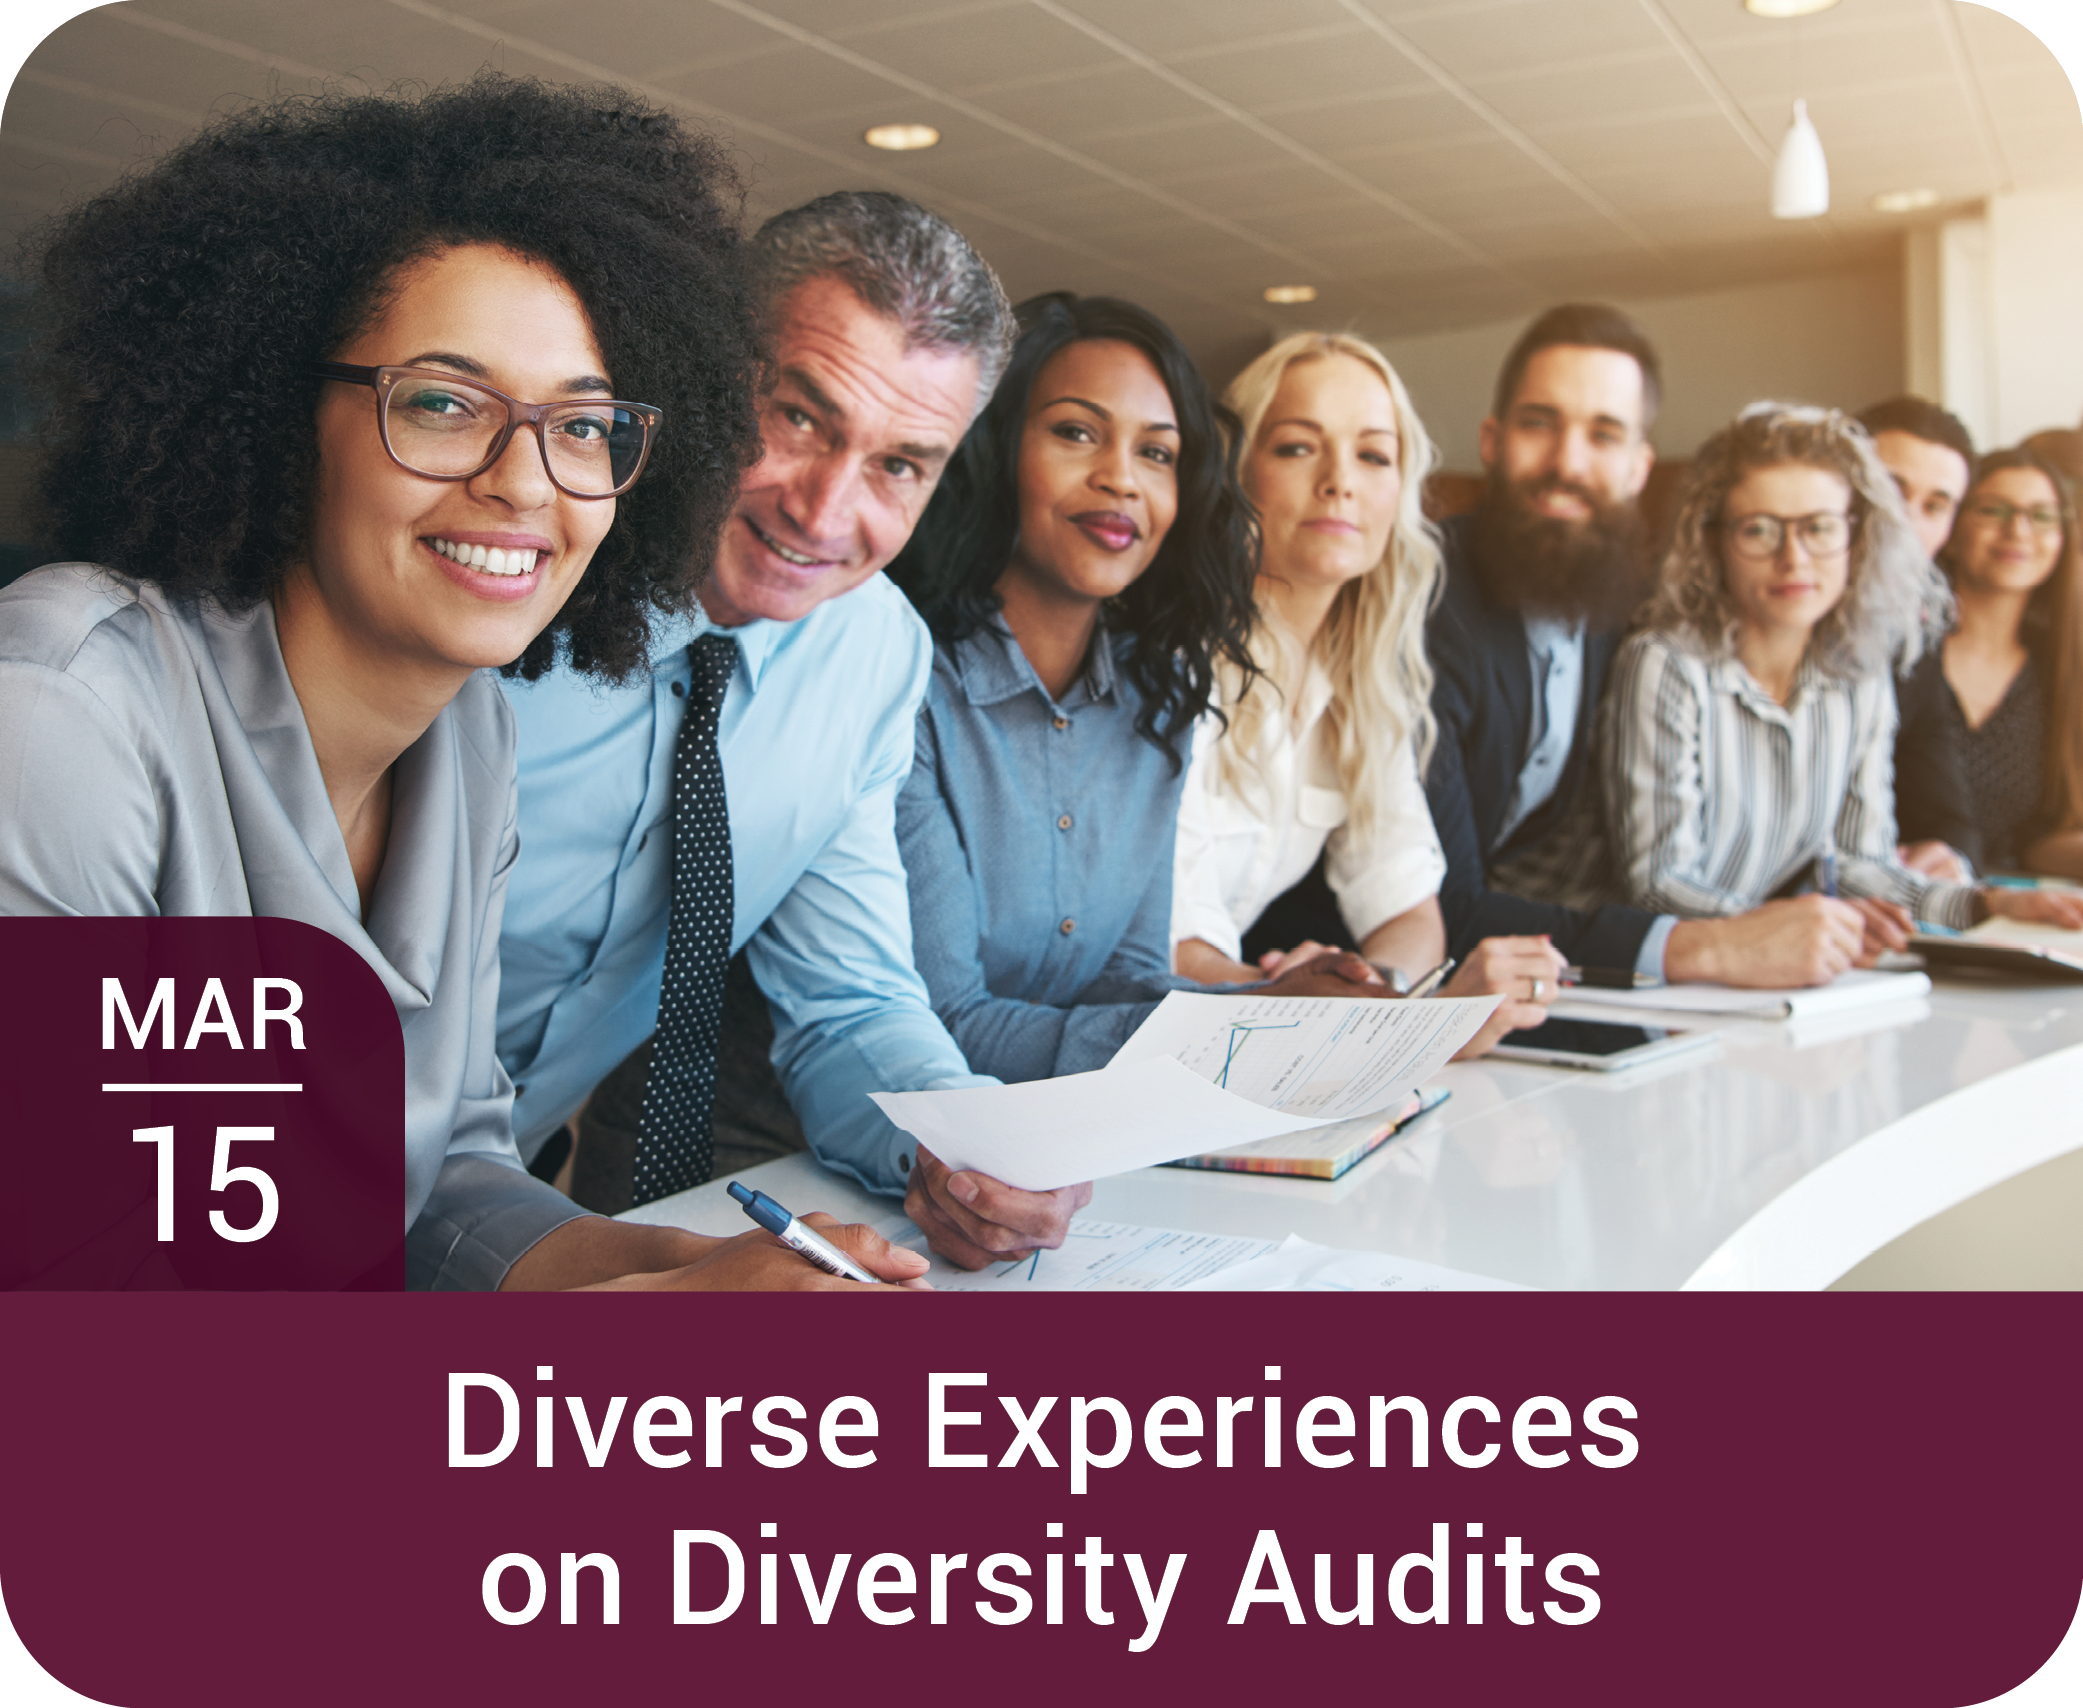 Calendar icon with date March 15 and text DIVERSE EXPERIENCES ON DIVERSITY AUDITS  with a photo of a group of around 10 smiling people looking at the camera